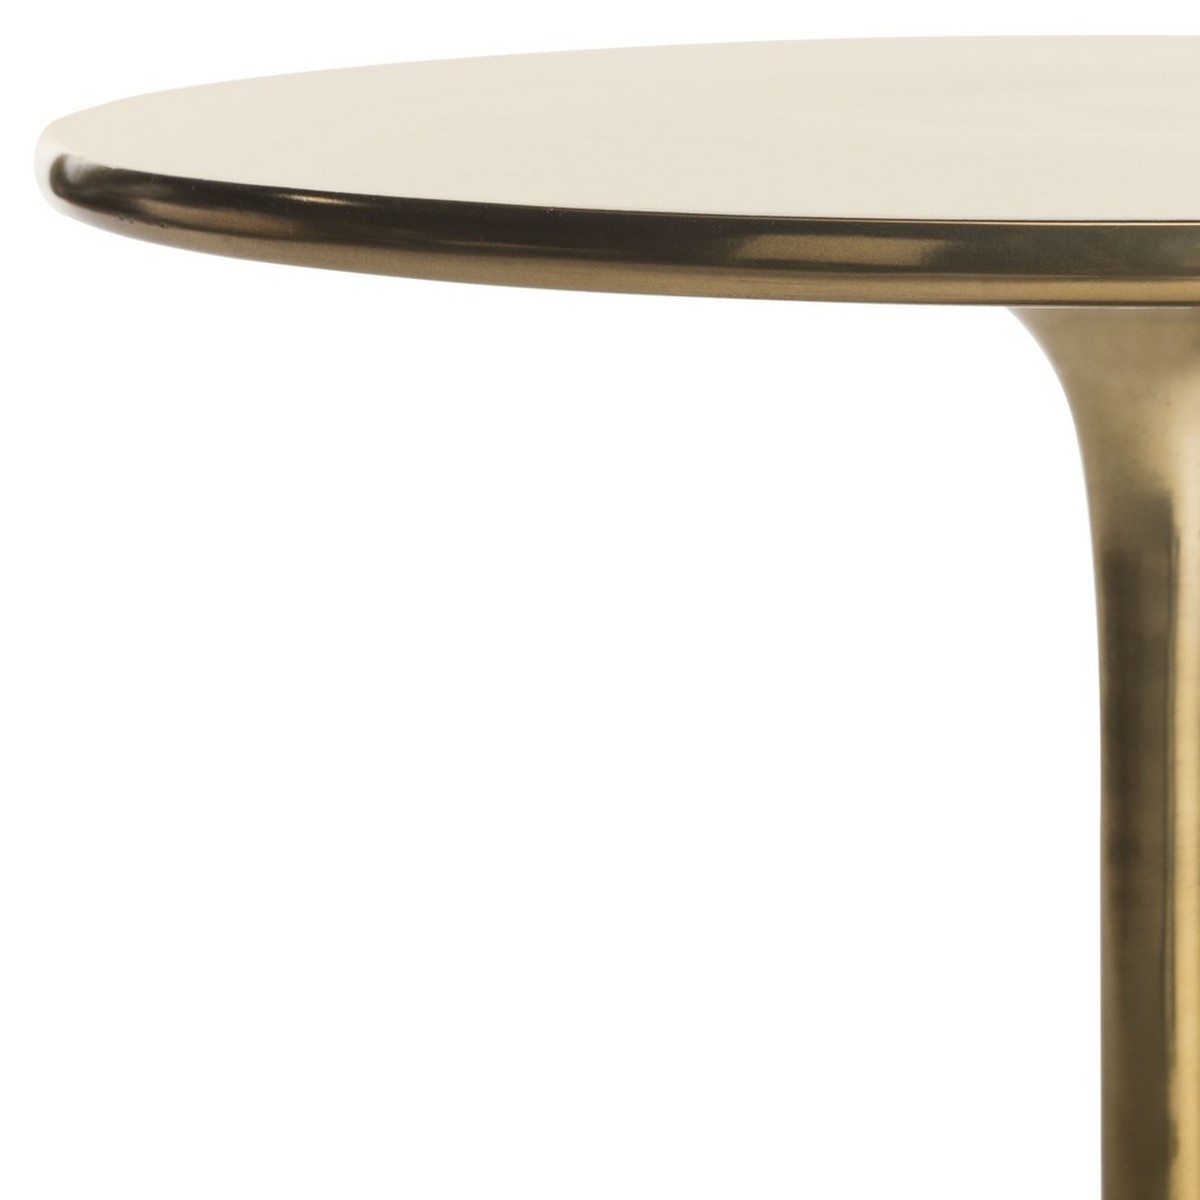 Hydra Round Side Table - Antique Brass - Arlo Home - Image 2